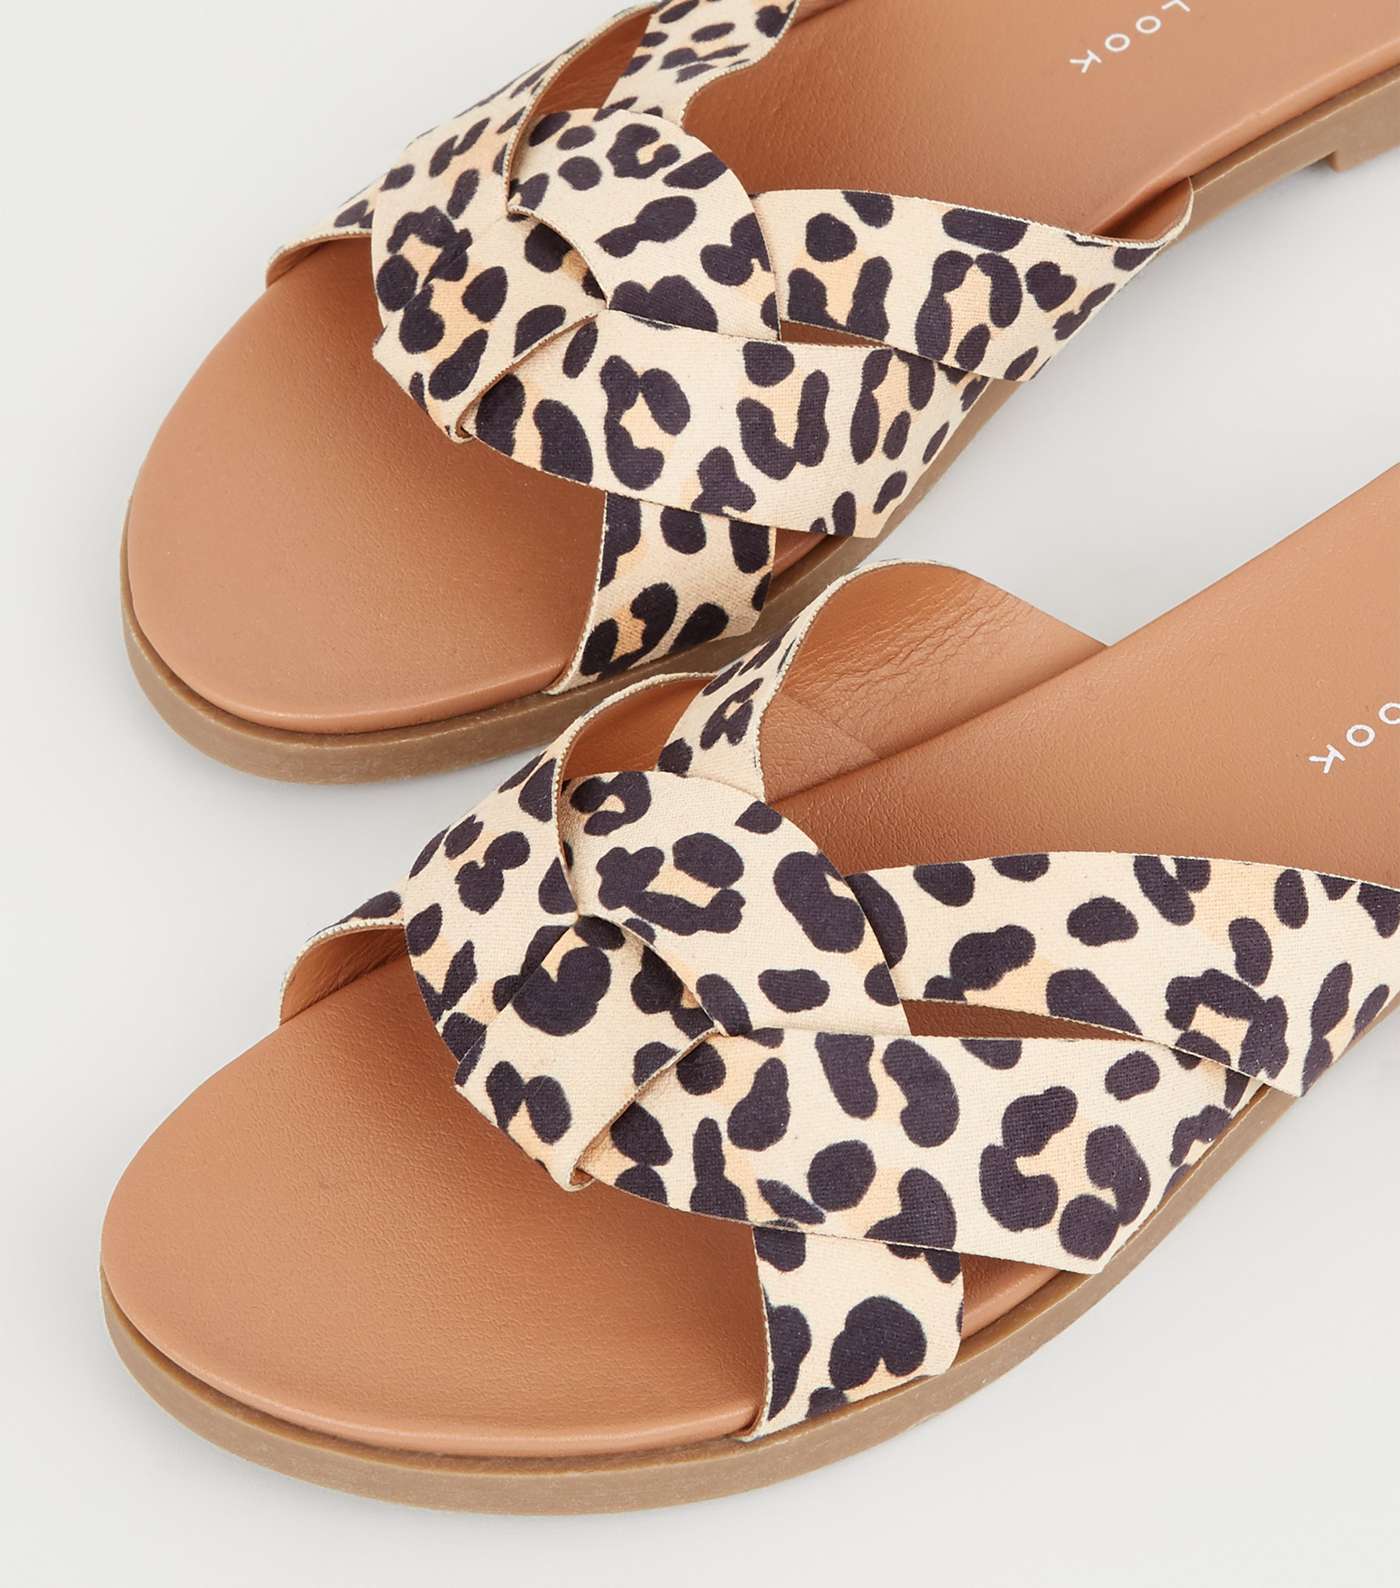 Wide Fit Stone Leopard Print Woven Footbed Sliders Image 3